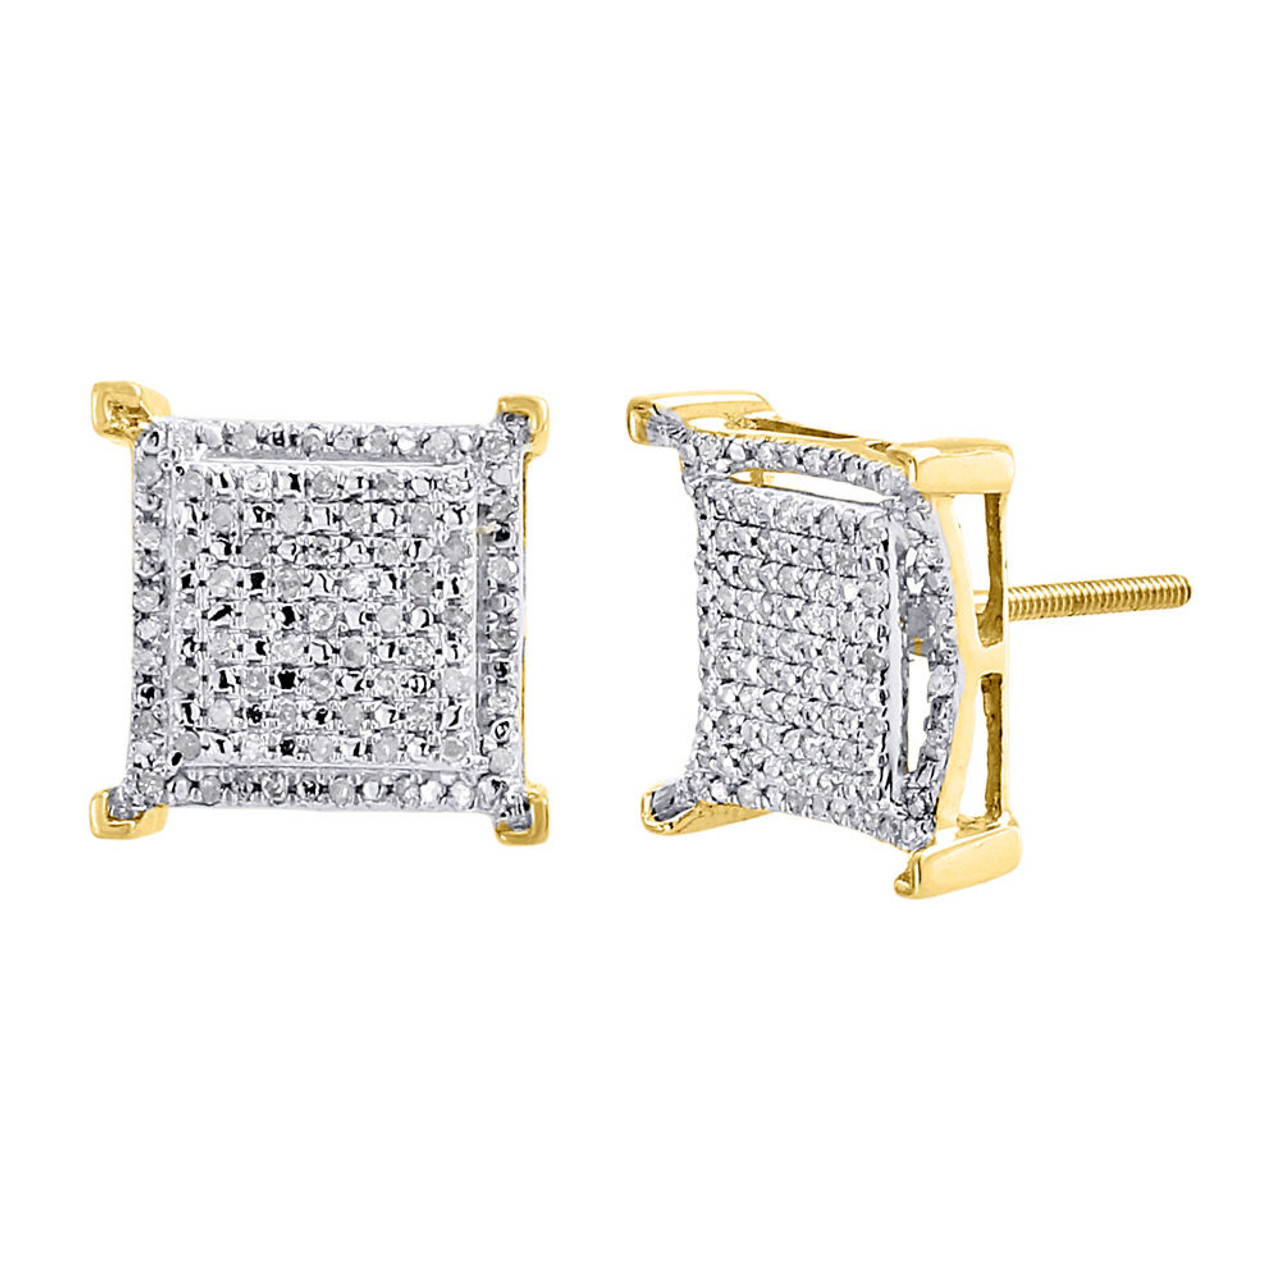 Diamond Square Earrings 10K Yellow Gold Round Cut Pave Design Studs 0. ...